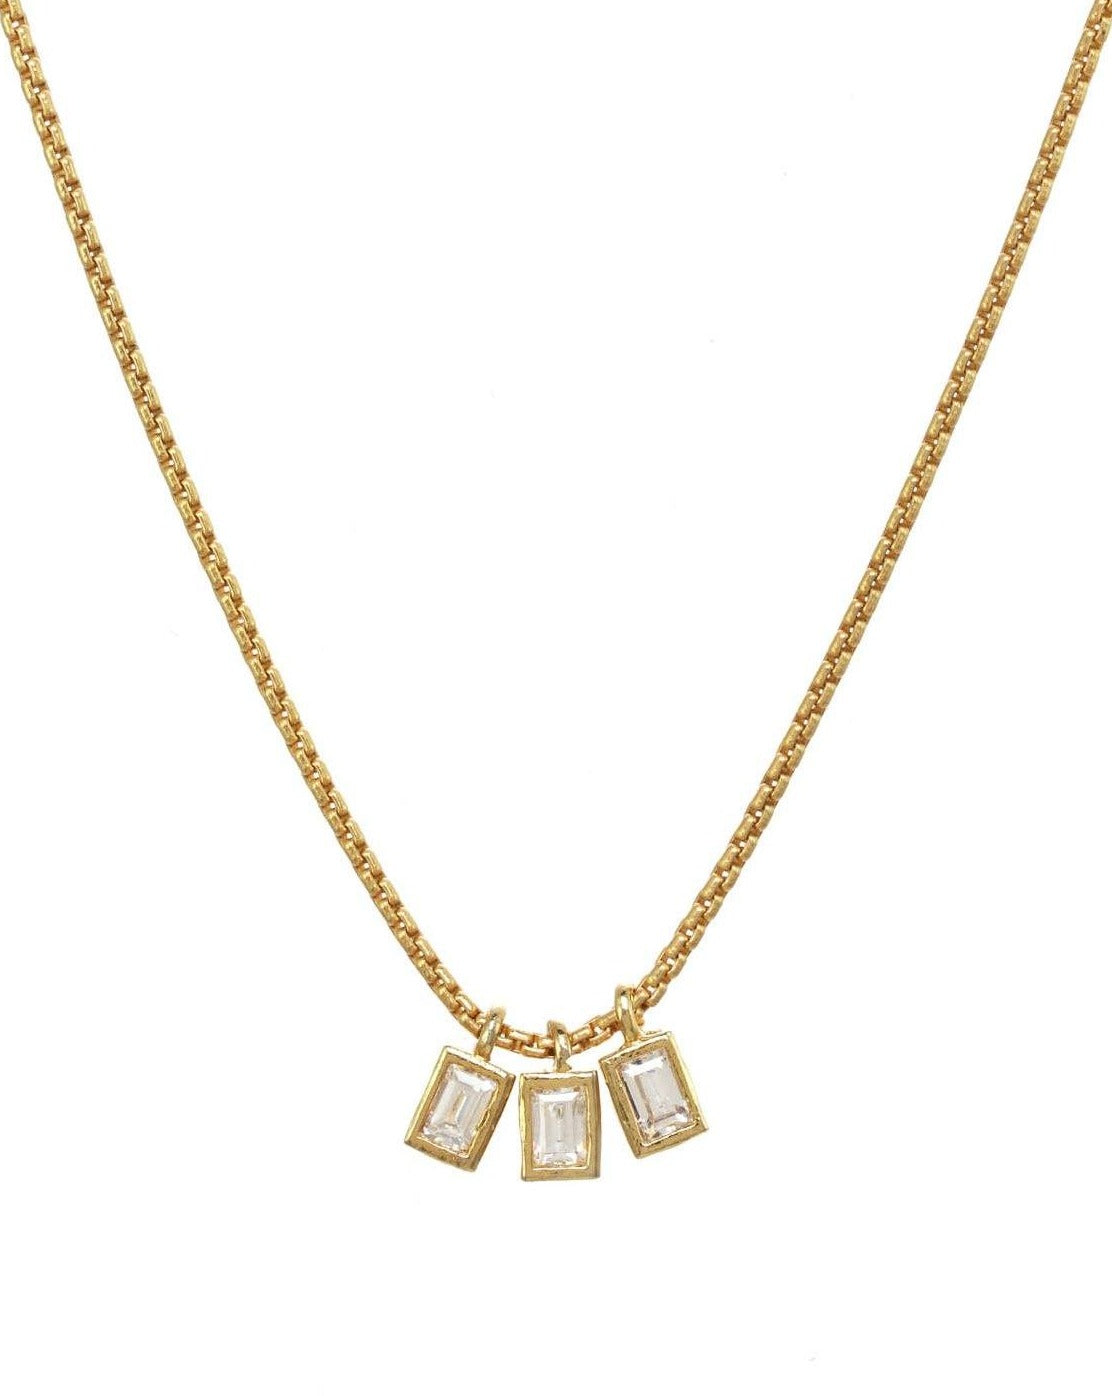 Avery Necklace by KOZAKH. A 16 to 18 inch adjustable length necklace in 14K Gold Filled, featuring 3 square cut Cubic Zirconias.